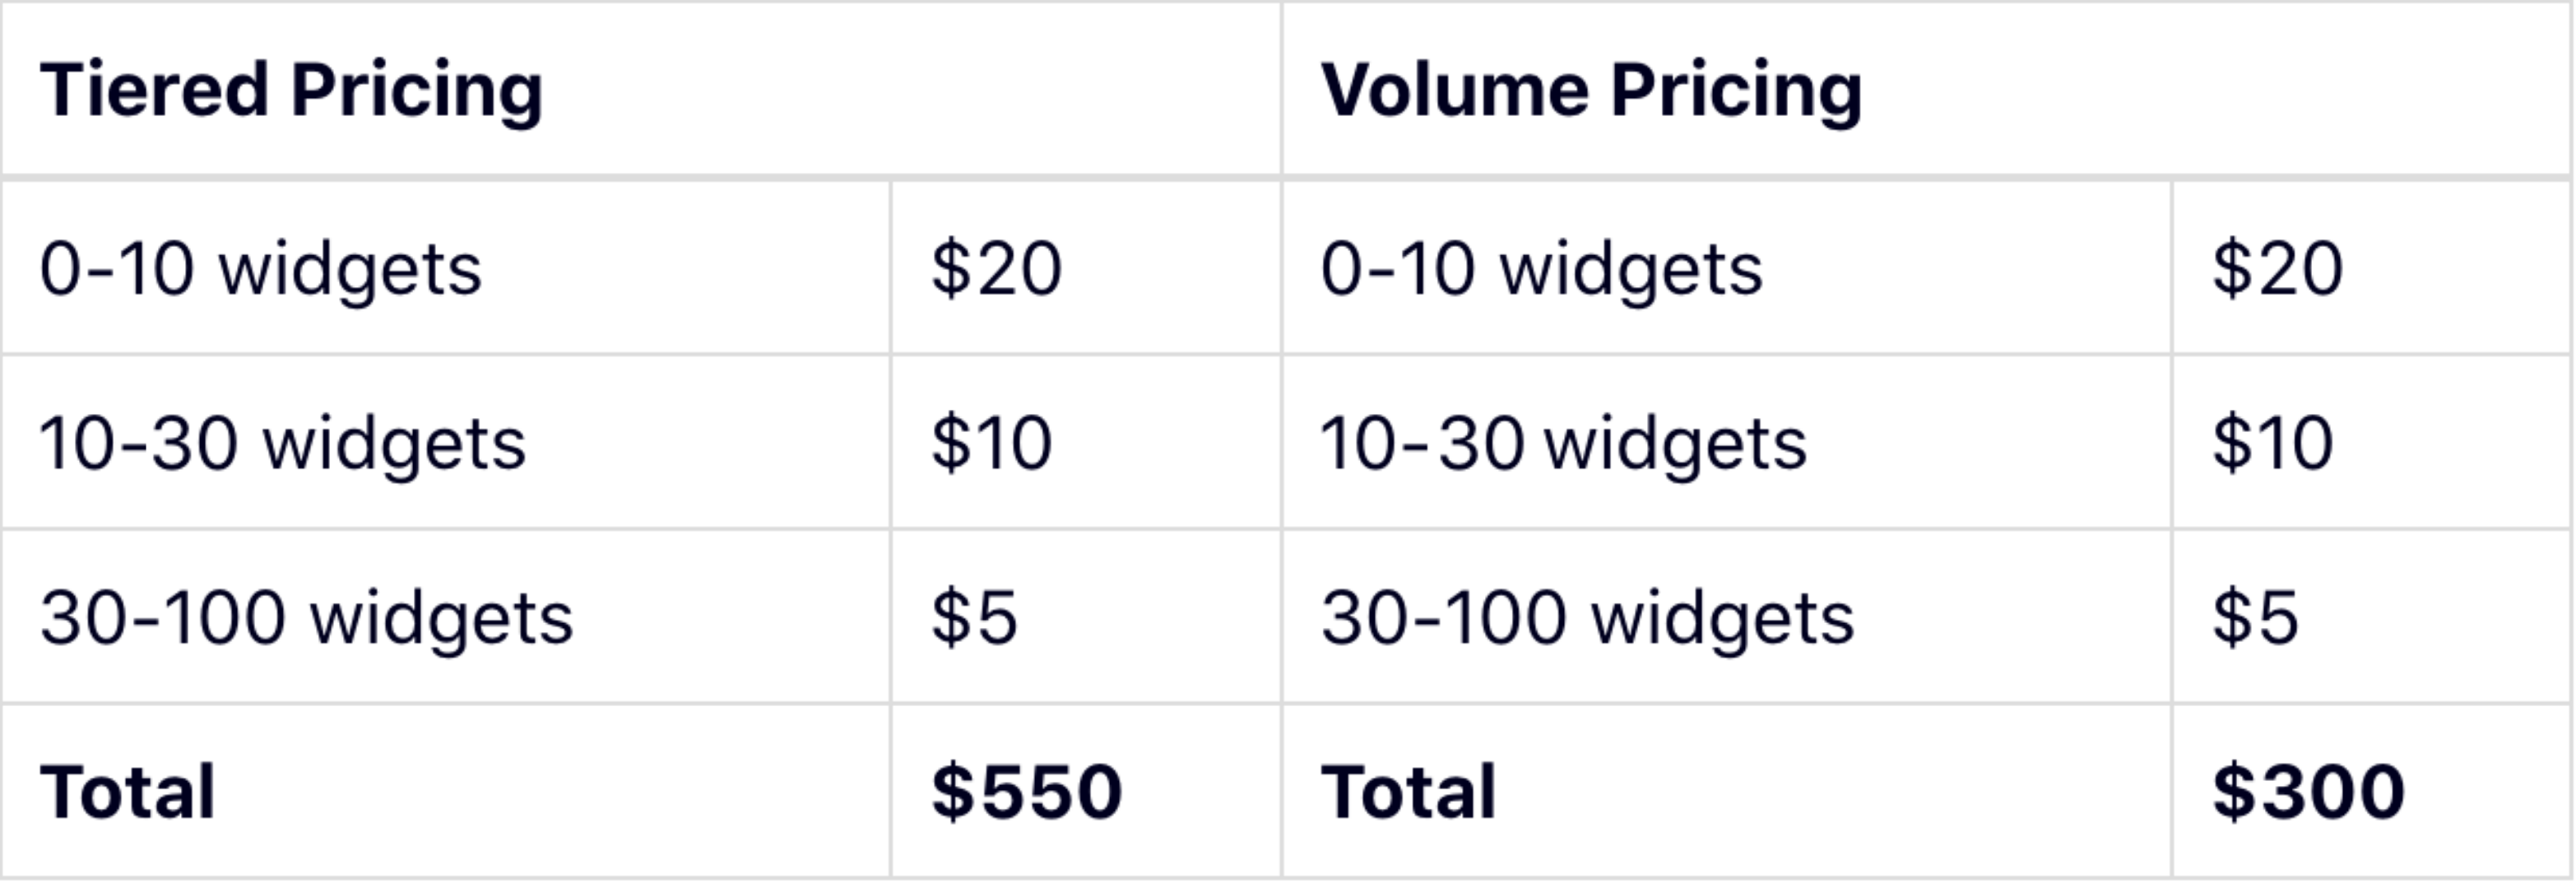 Tiered Pricing Model vs Tier Pricing Strategy Definition Examples